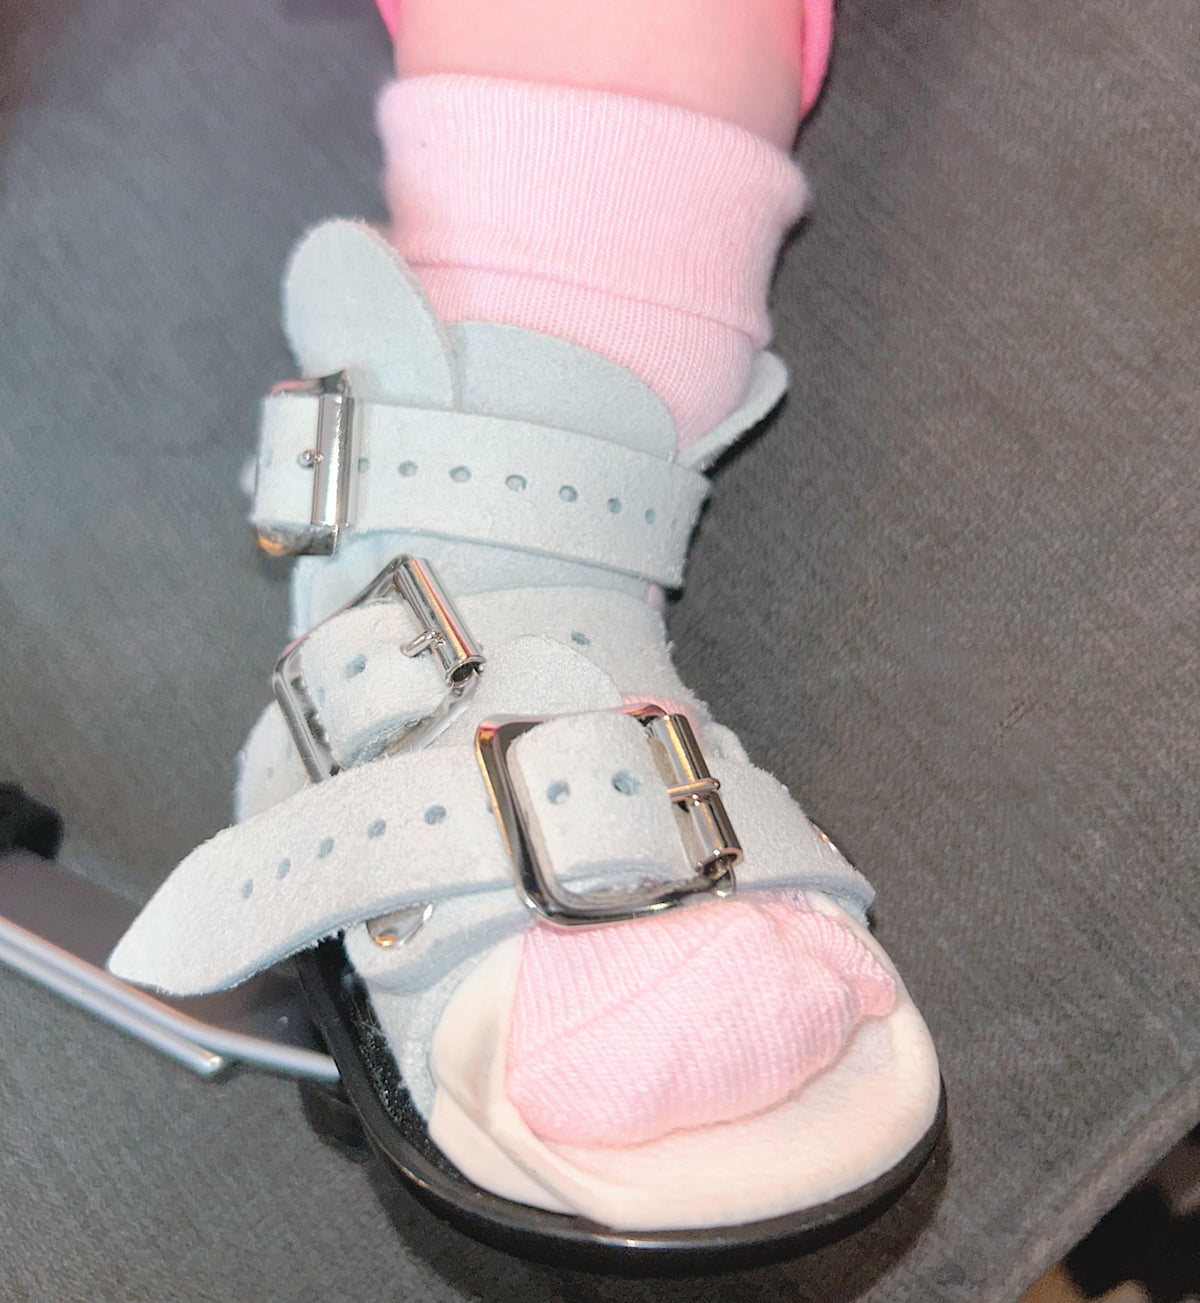 Talipes (clubfoot) Boots and Bar Socks - Non-Slip Stay On Baby and Toddler Socks - 5 Pack in Pink & Blush Stripe